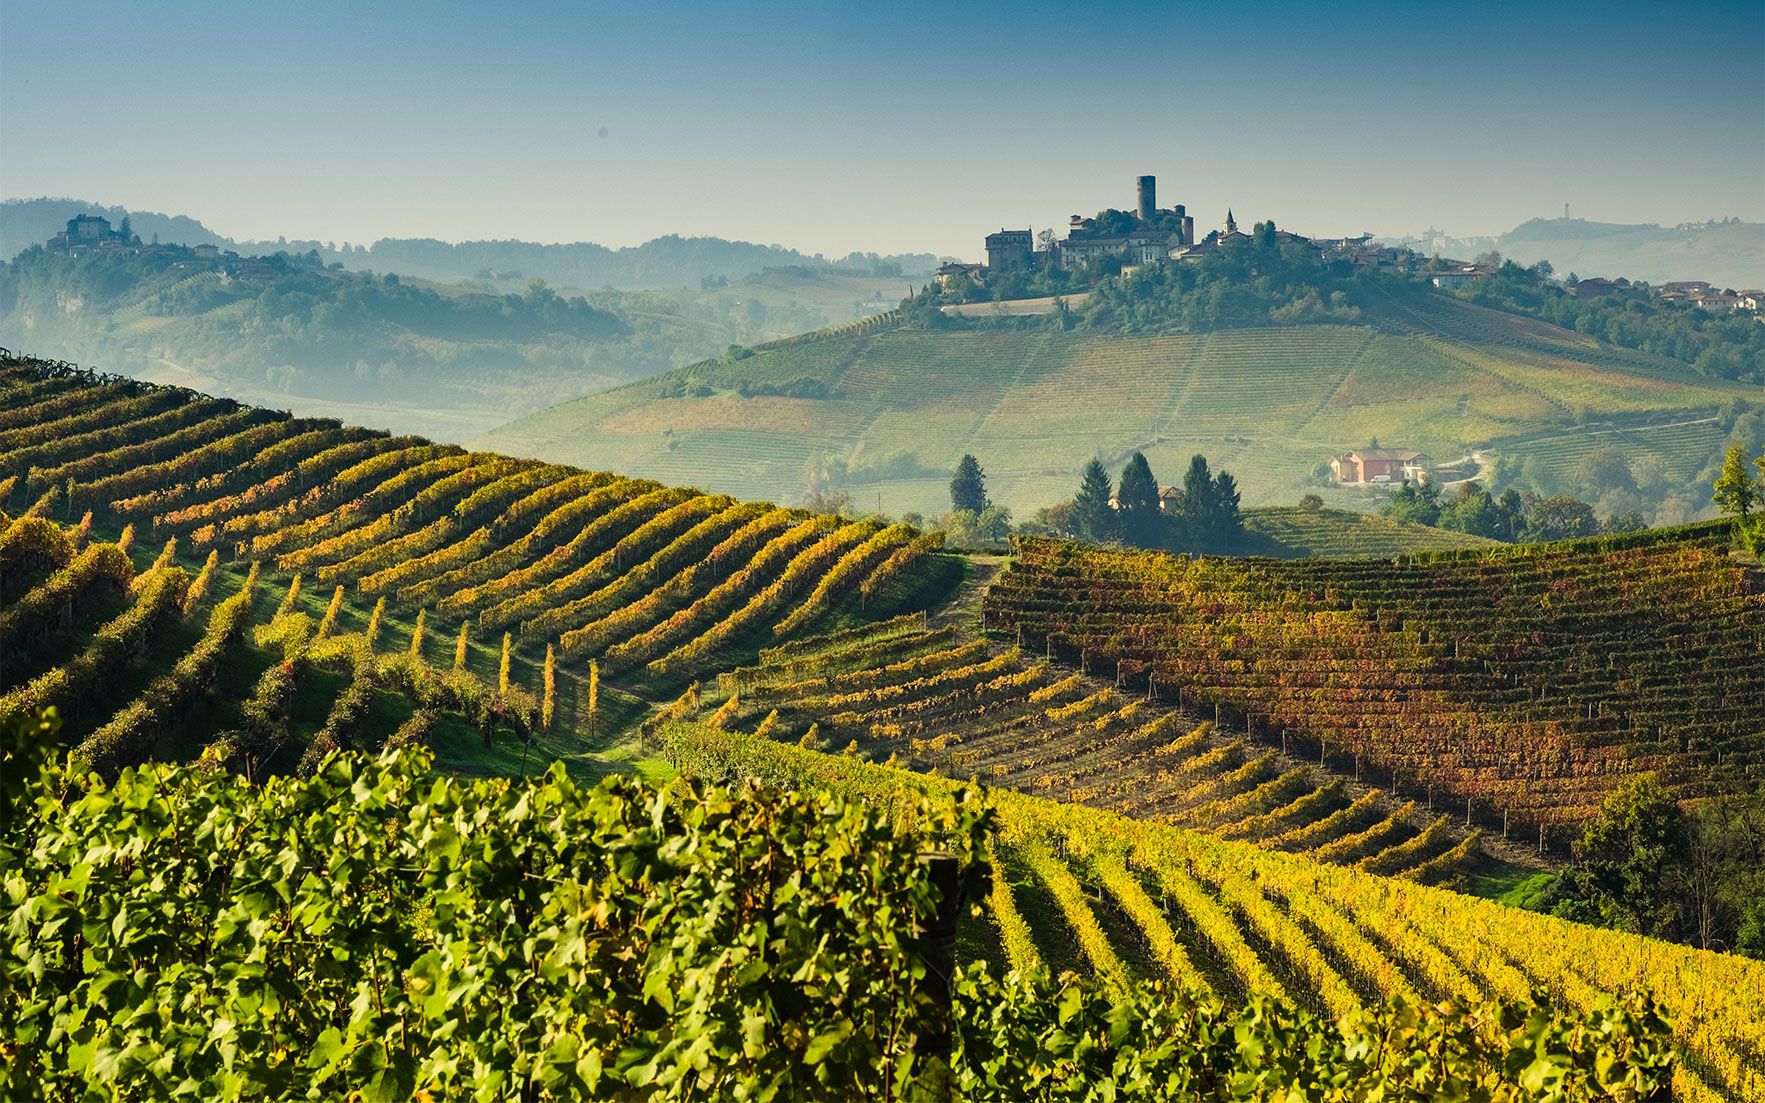 Barolo, Barbaresco, Langhe & Nebbiolo tasting: what to expect